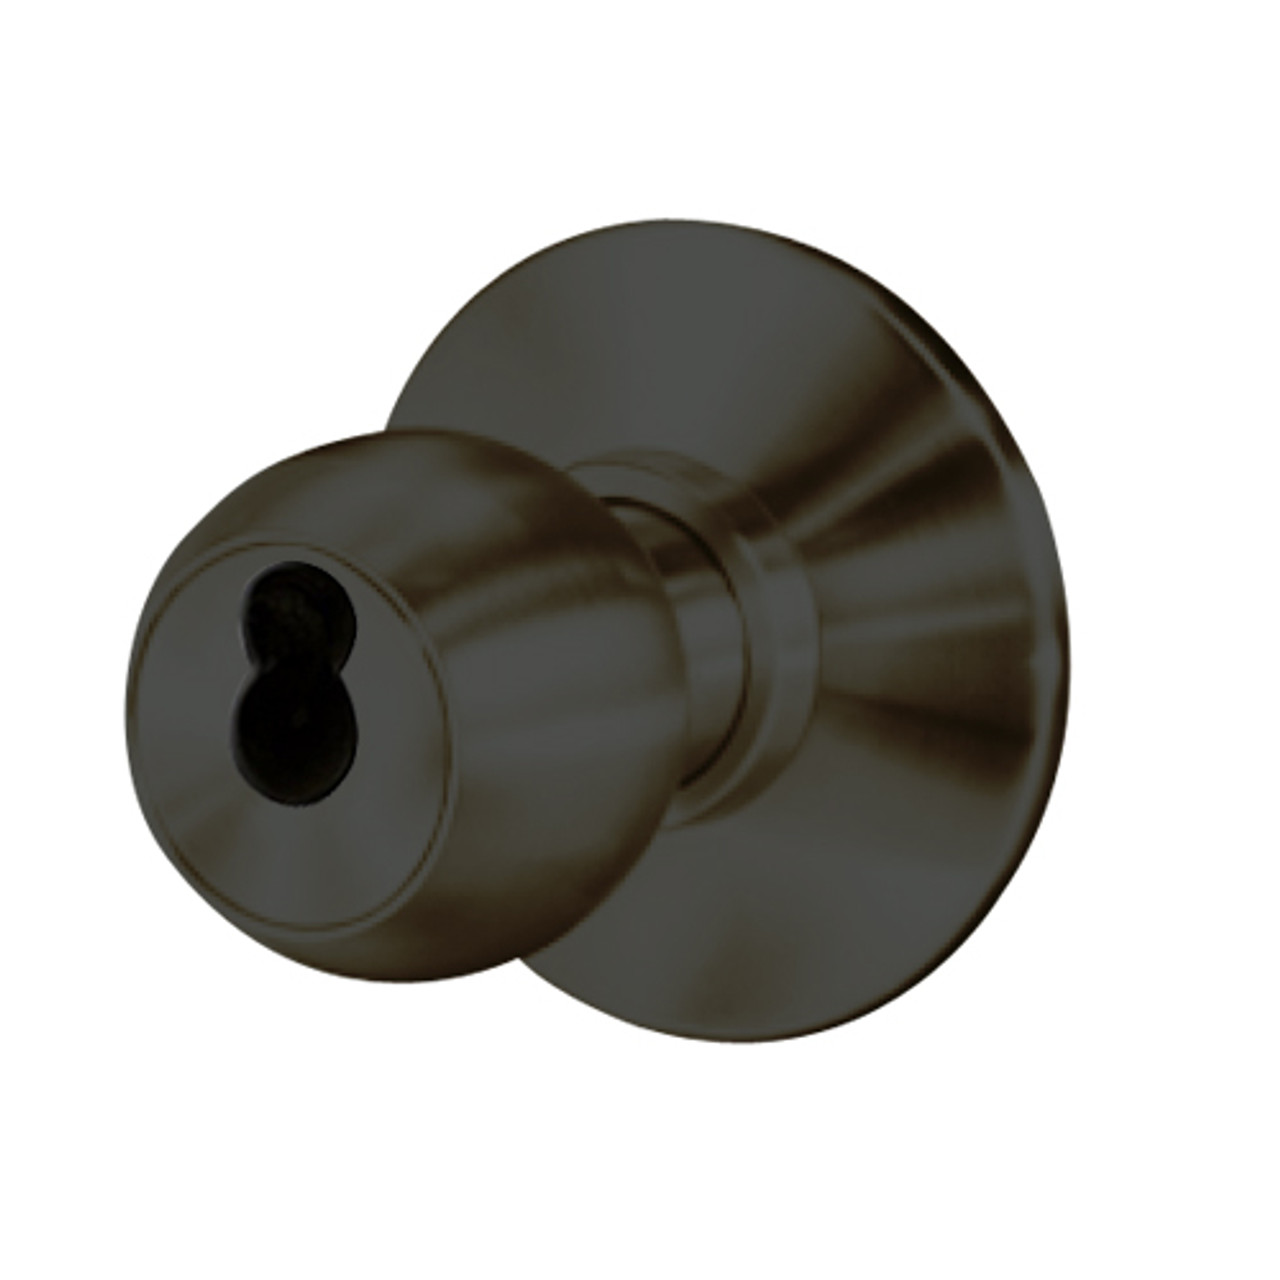 8K37A4DSTK613 Best 8K Series Dormitory/Storeroom Heavy Duty Cylindrical Knob Locks with Round Style in Oil Rubbed Bronze